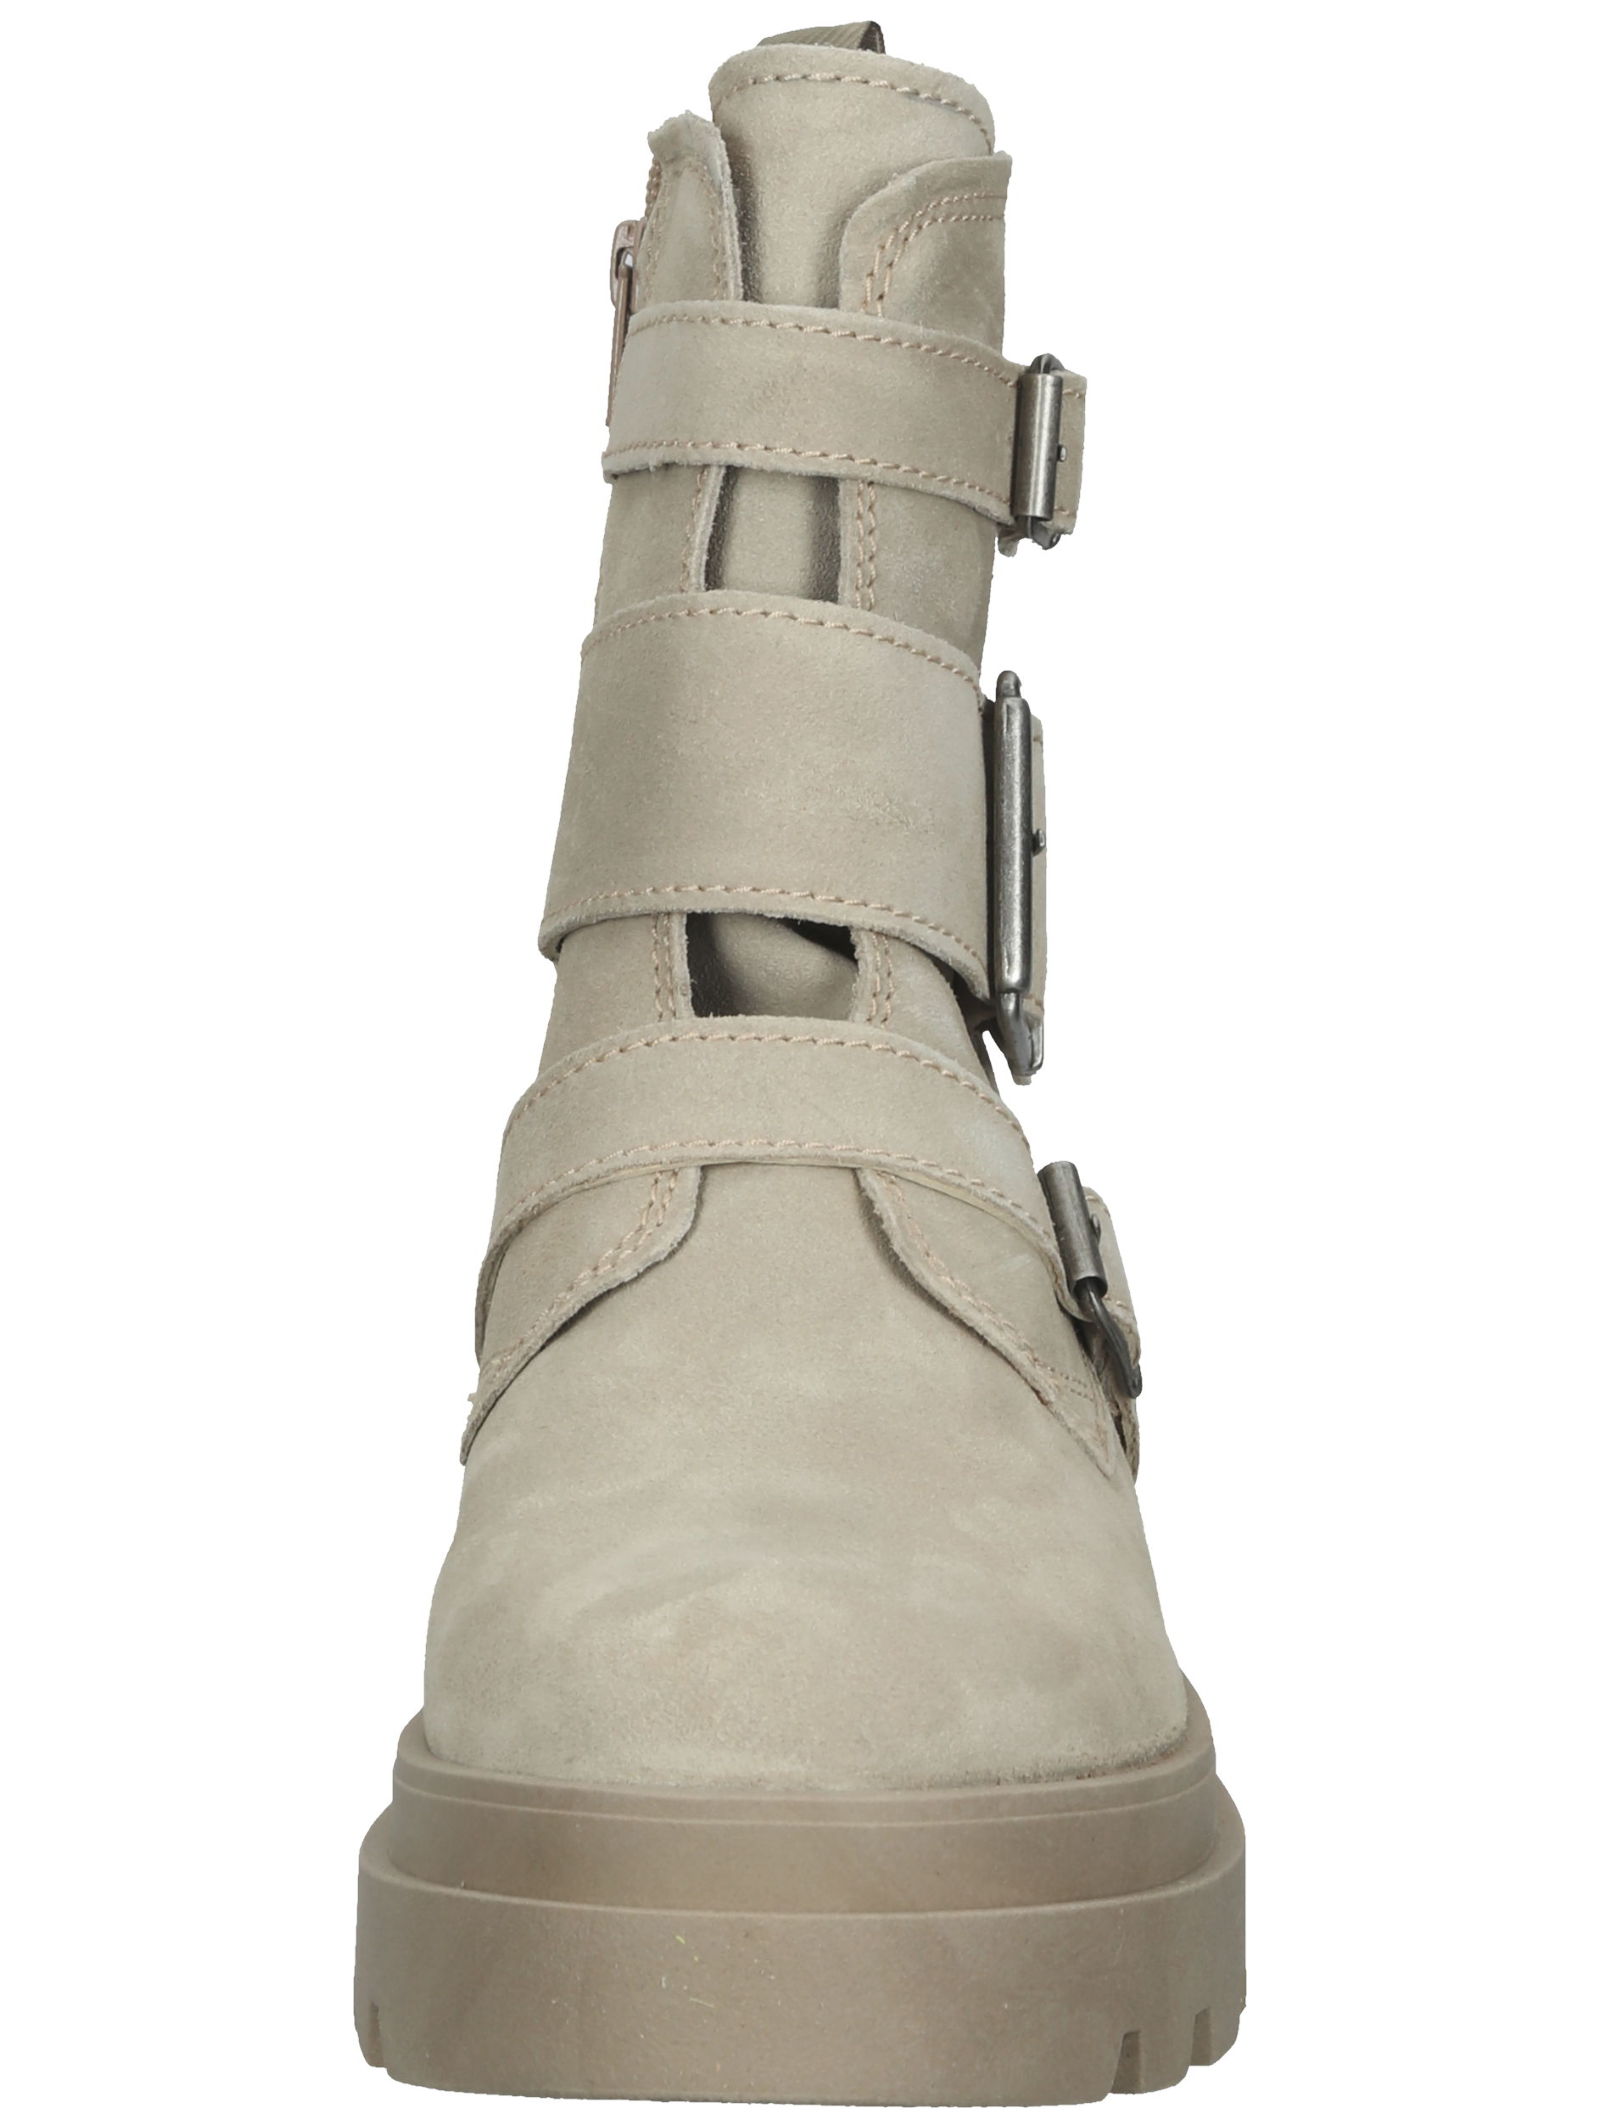 FLY LONDON Boots in Creme 